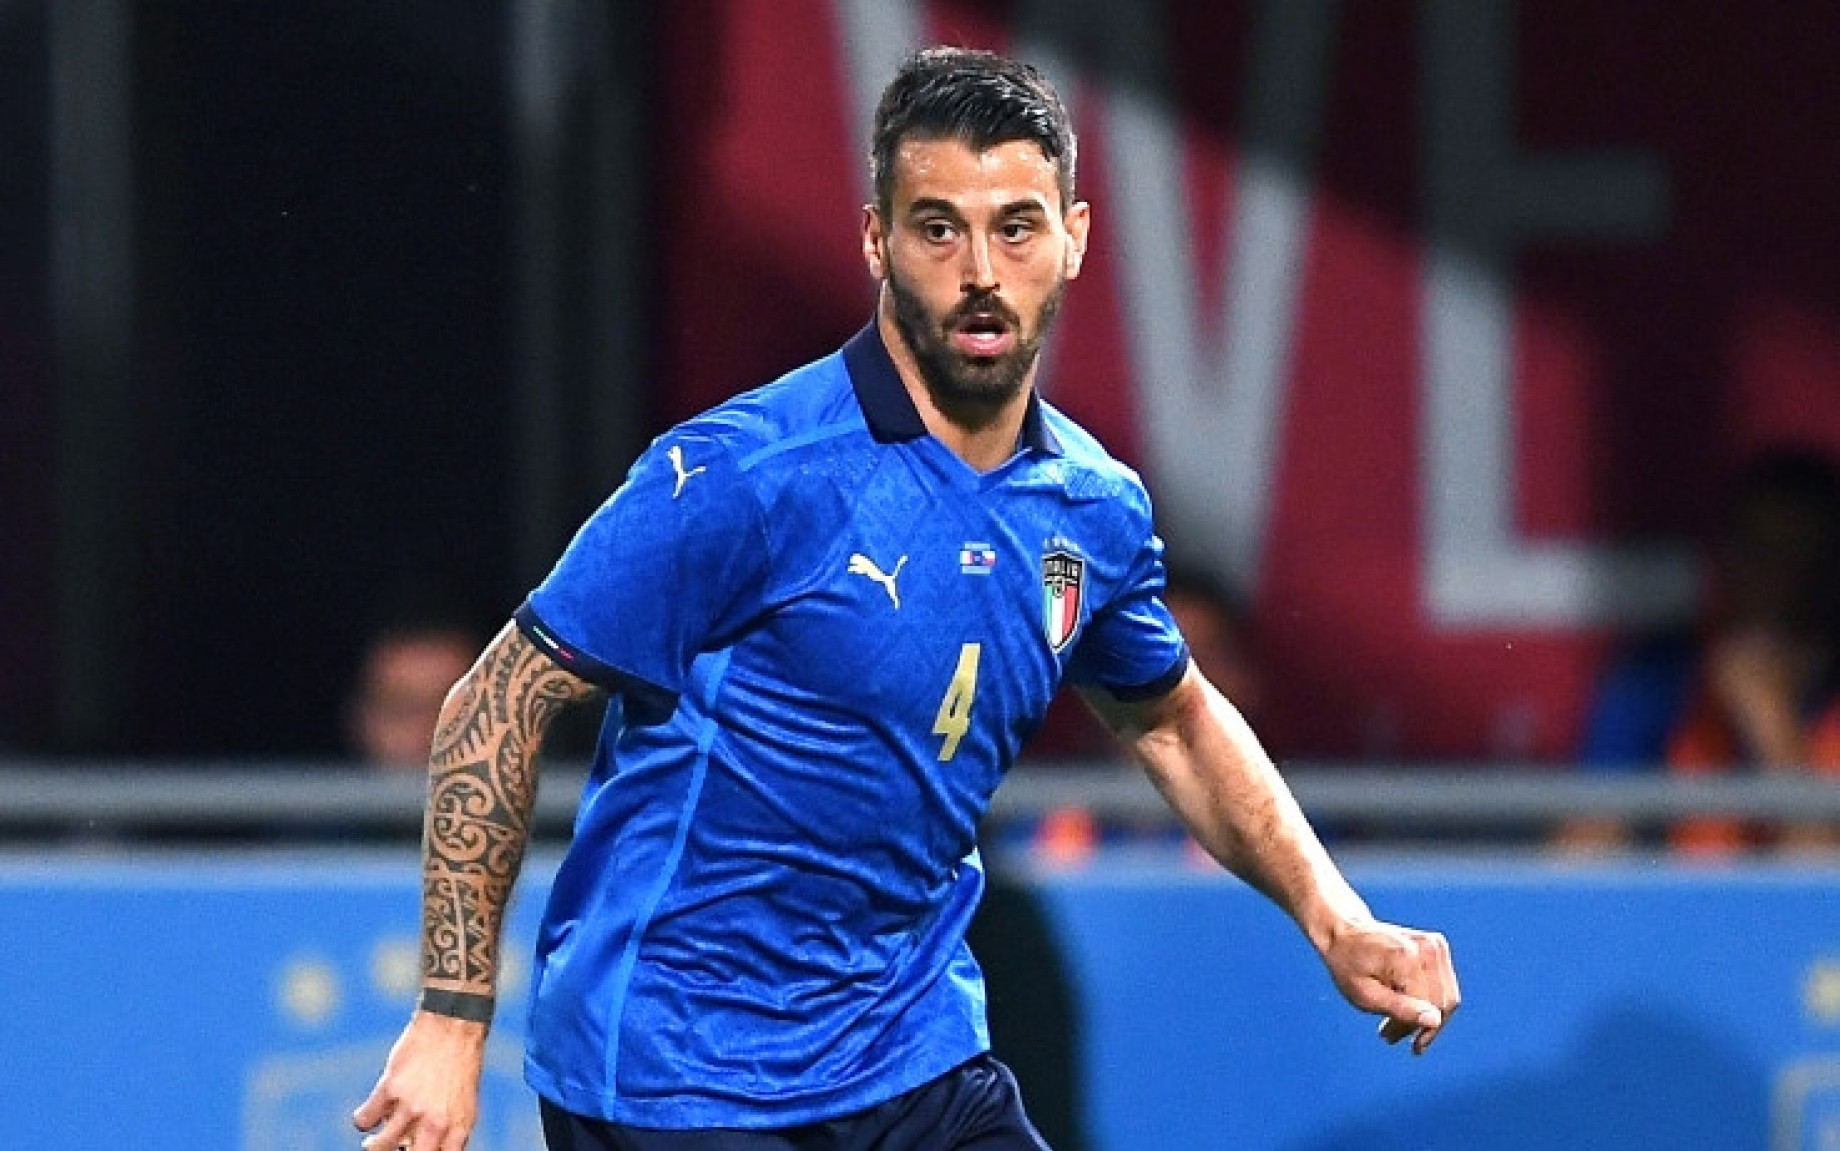 spinazzola-image-1.jpg